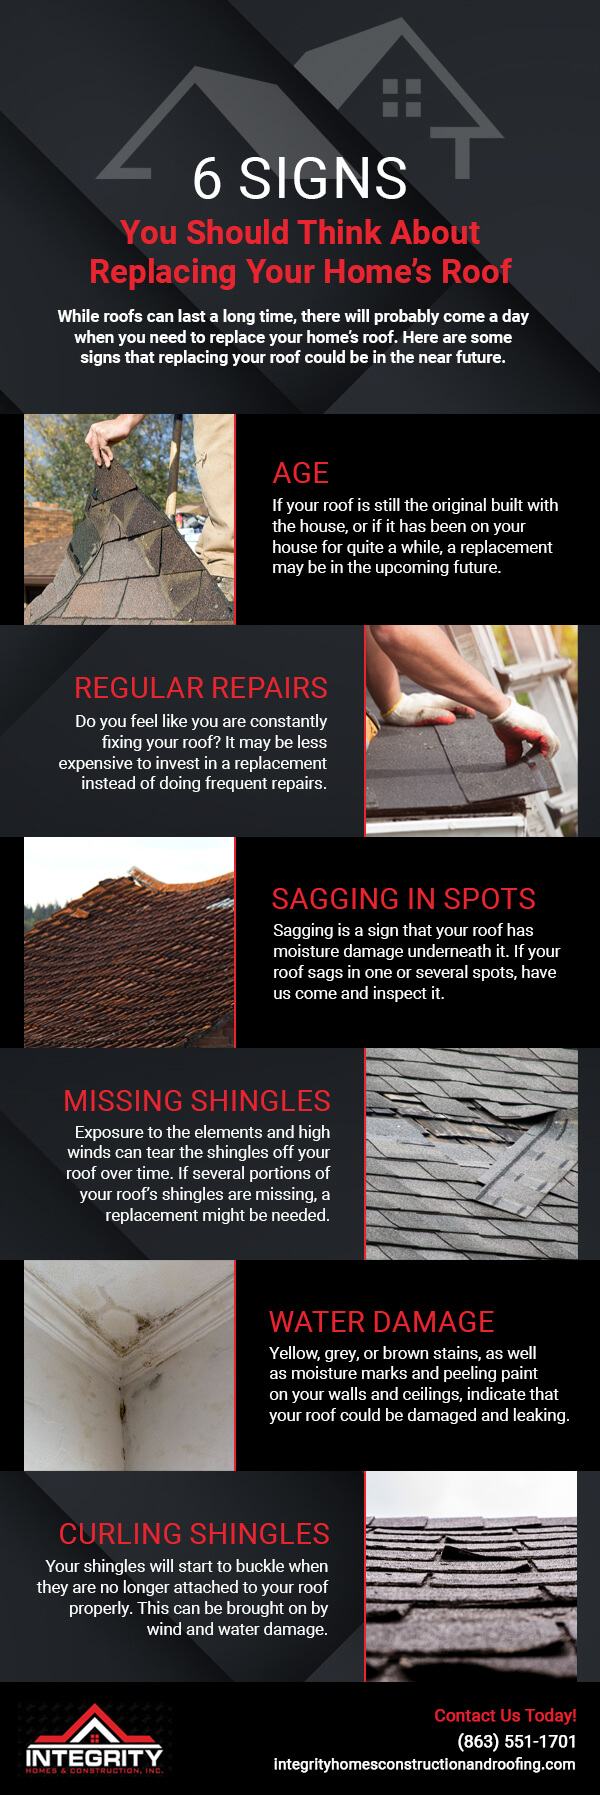 Six Signs You Should Think About Replacing Your Home’s Roof